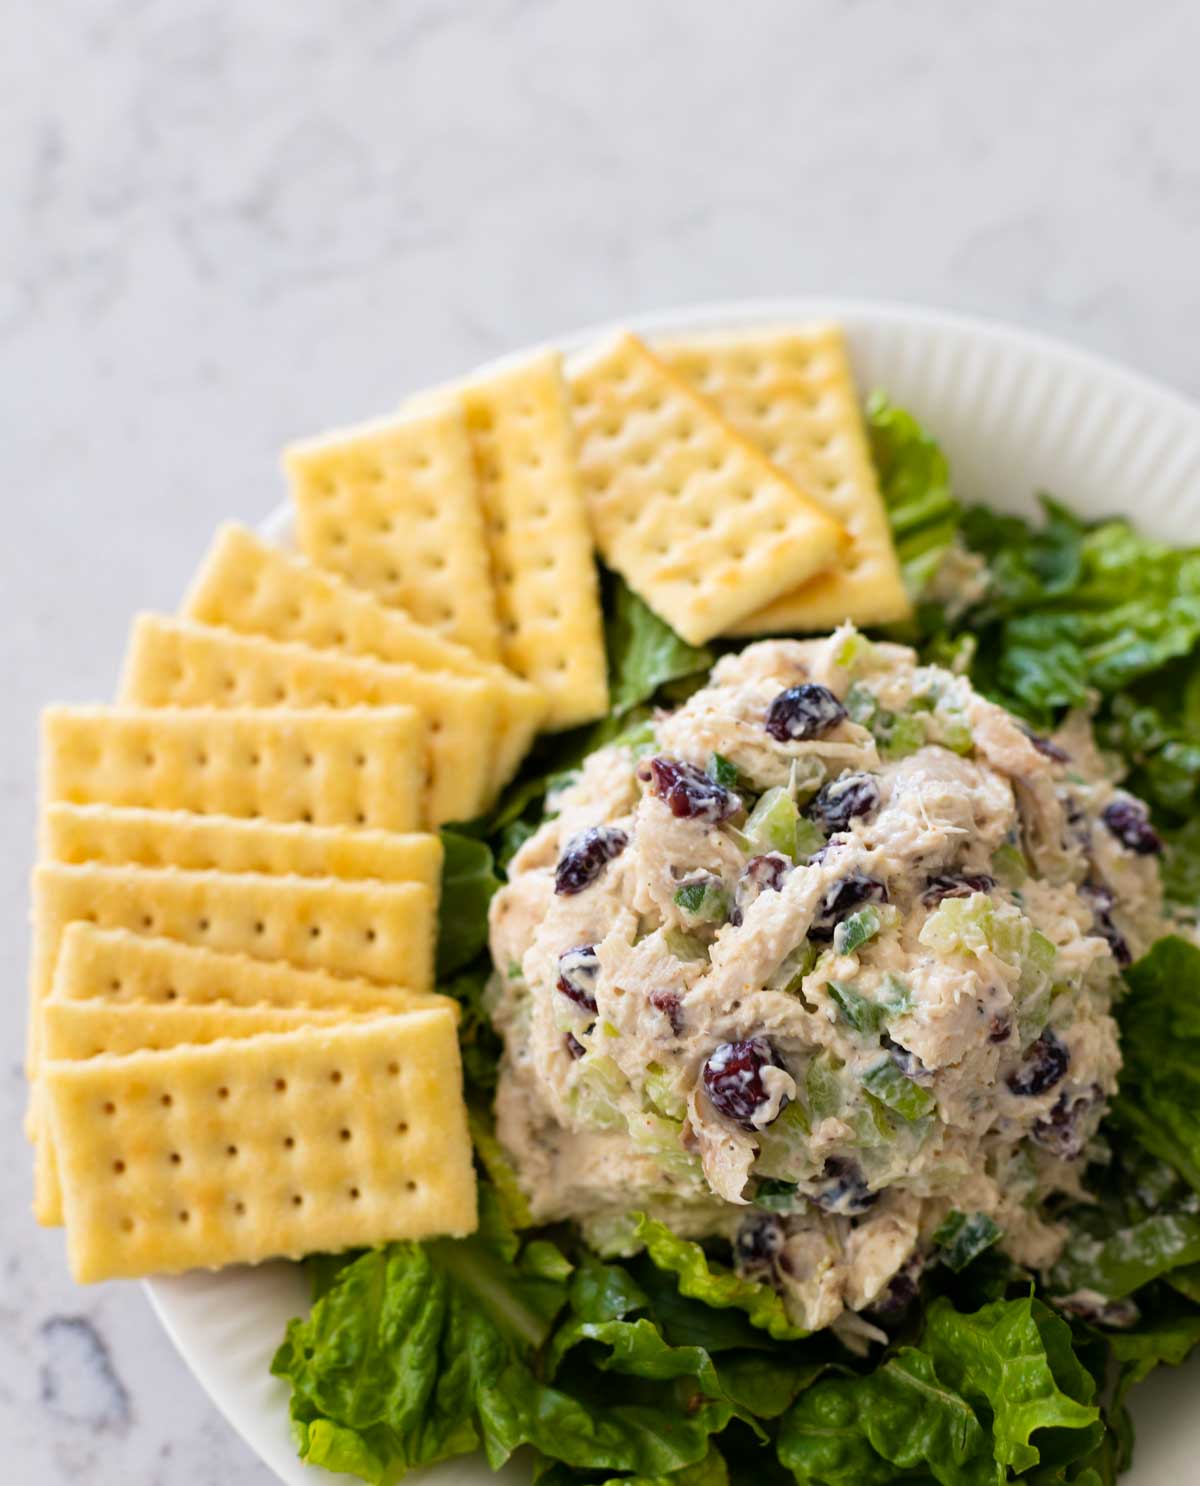 The ball of chicken salad is being served on lettuce with a plate of crackers.